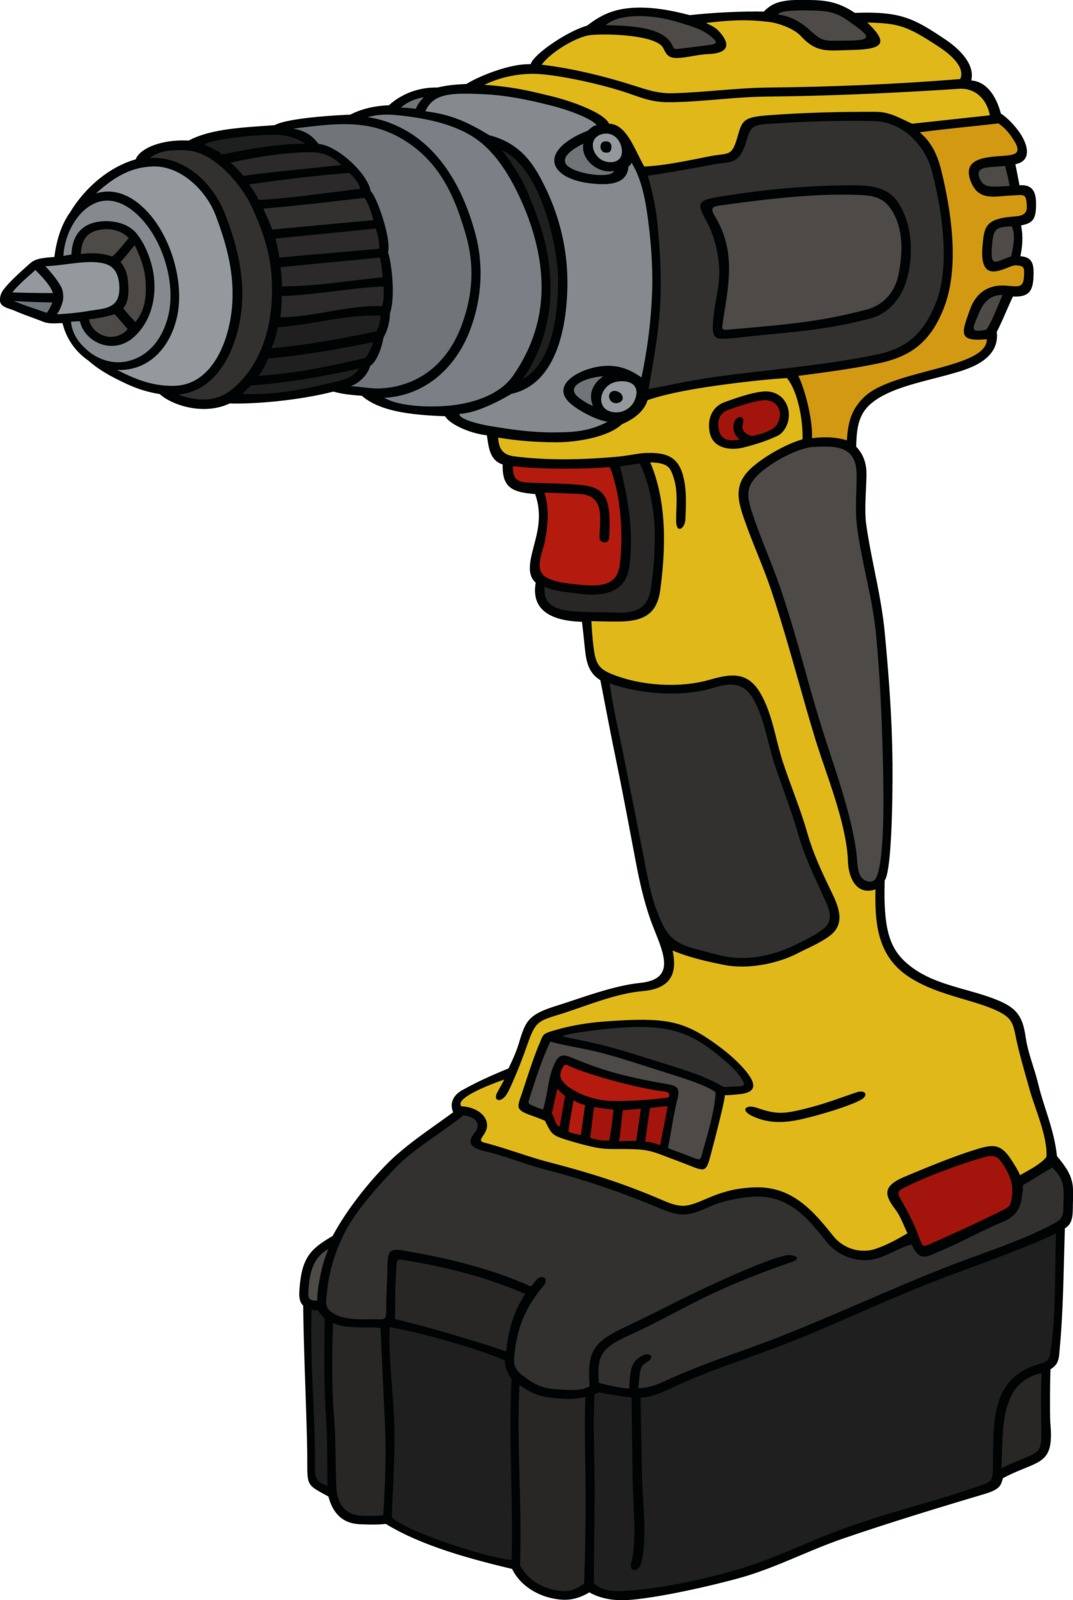 The yellow cordless screwdriver by vostal